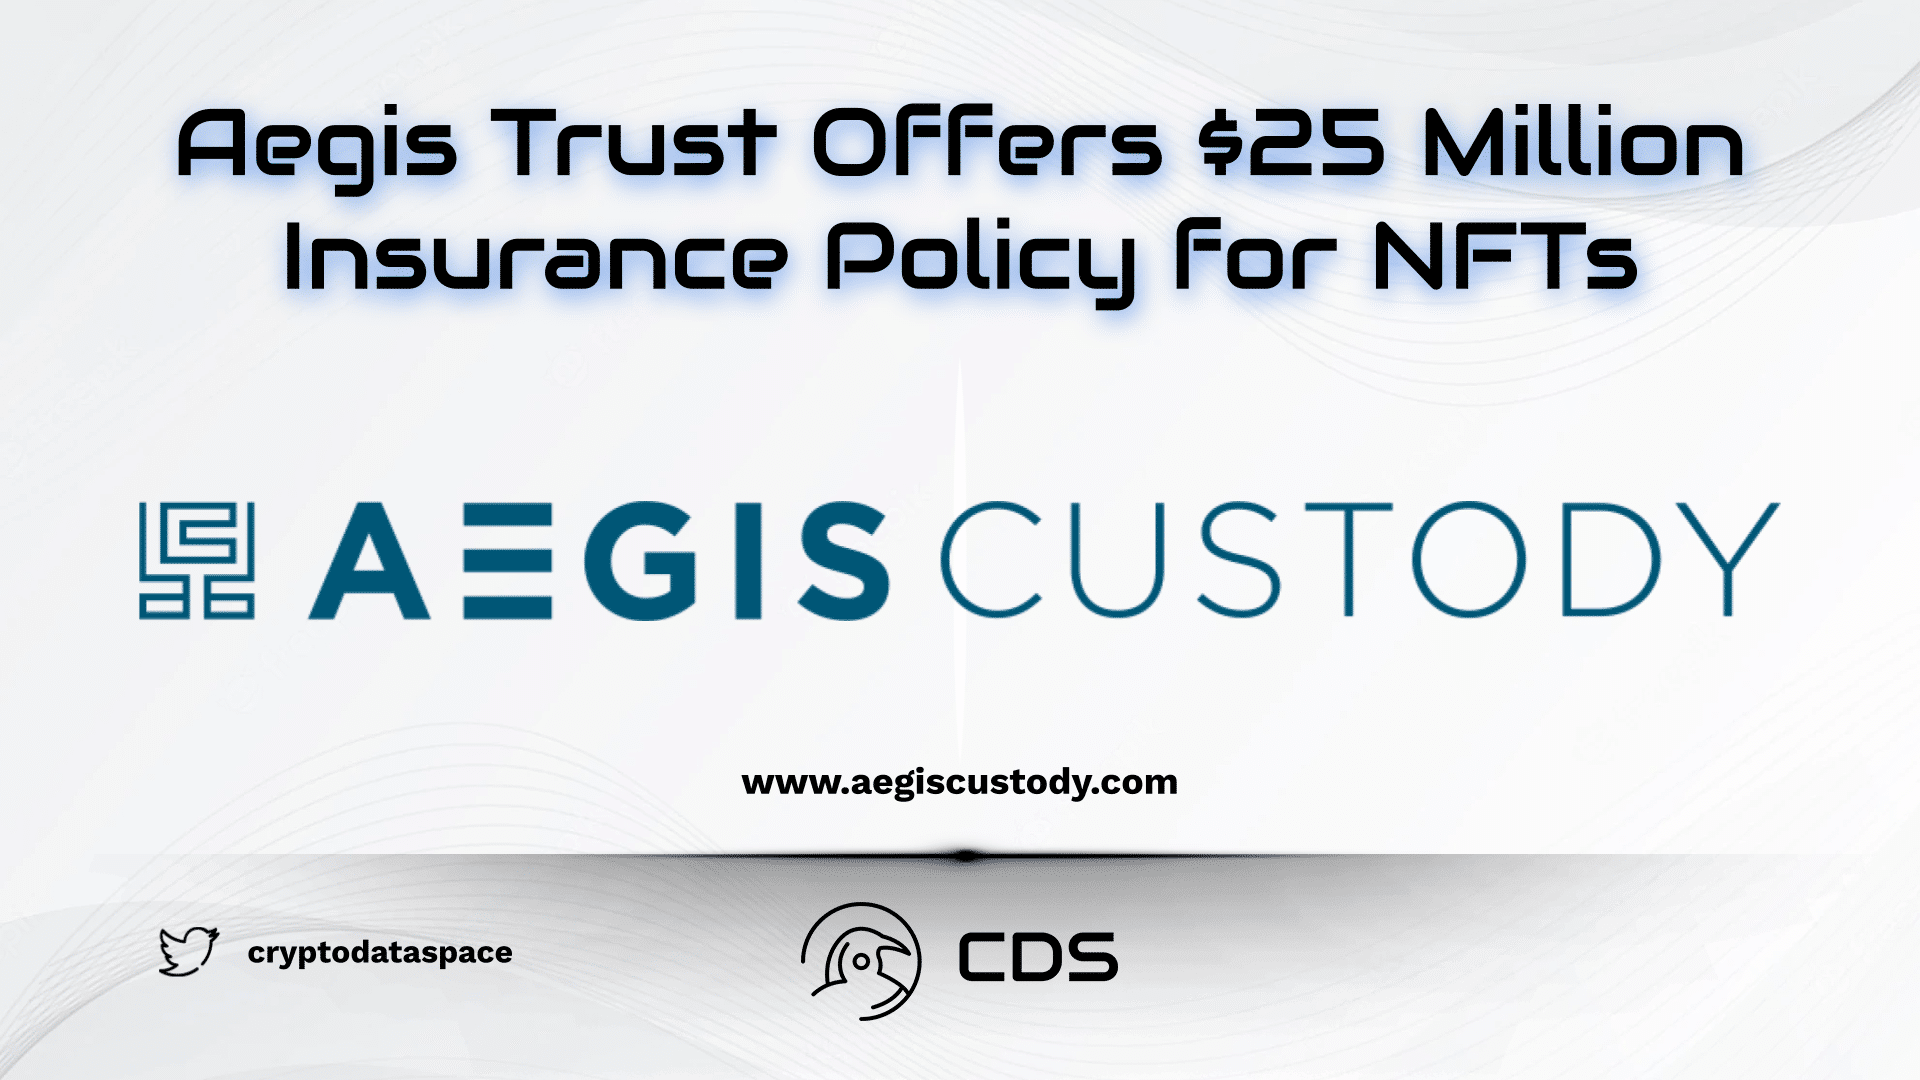 Aegis Trust Offers $25 Million Insurance Policy for NFTs